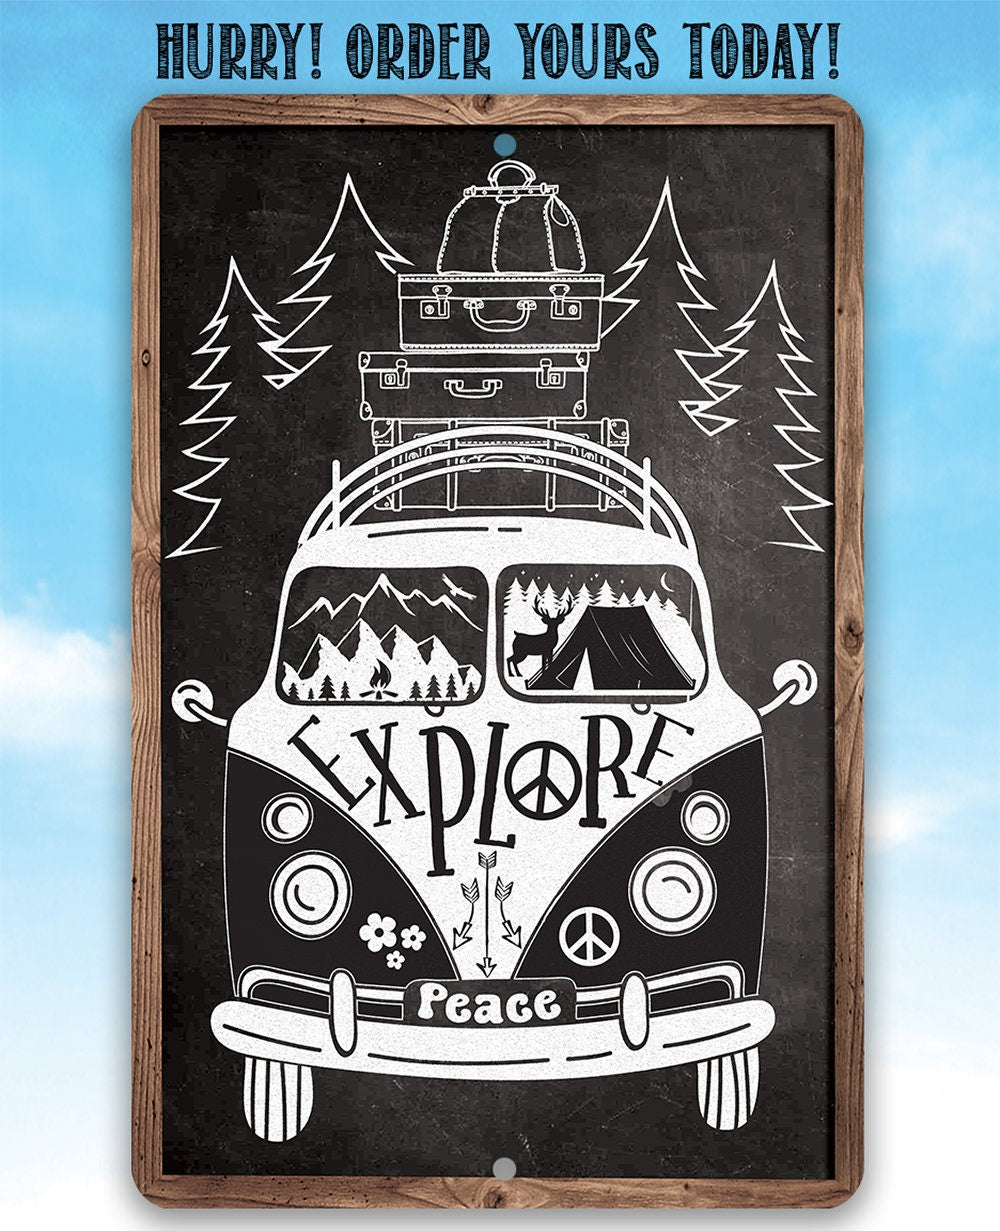 Explore in a Volkswagen, Peace - 8" x 12" or 12" x 18" Aluminum Tin Awesome Metal Poster Lone Star Art 